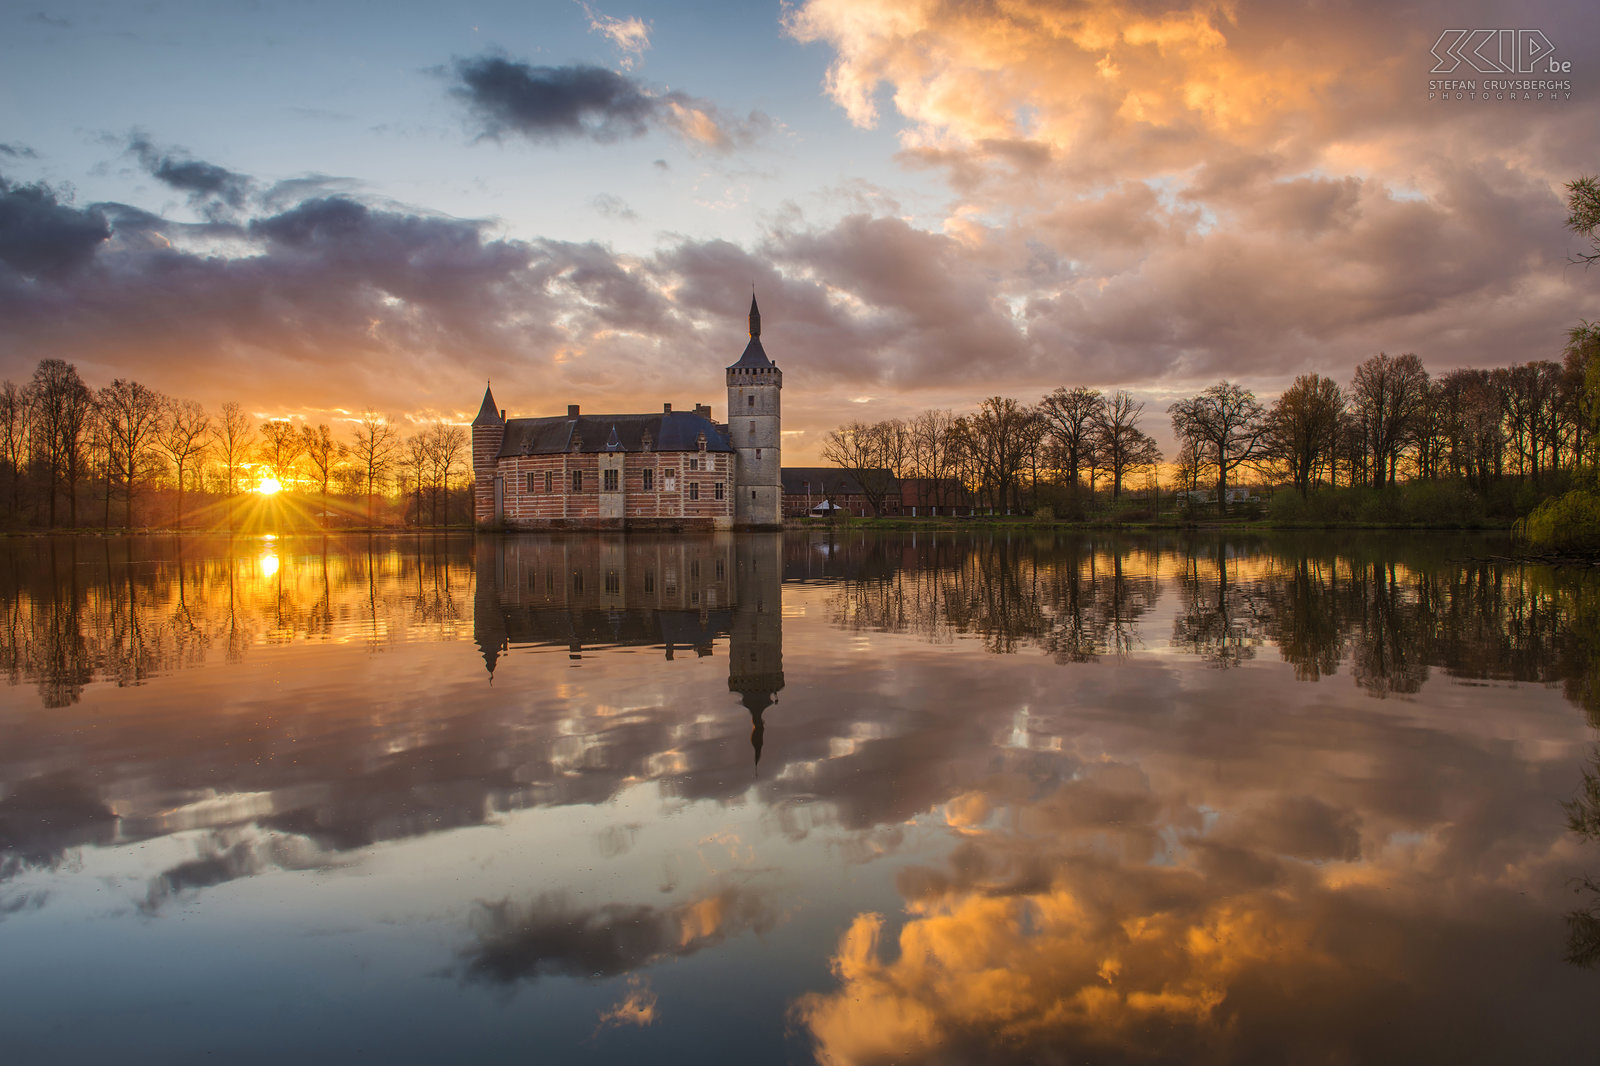 Sint-Pieters-Rode - Sunrise at castle of Horst In the 13th century the knights of Horst built a large farmstead and in the 15th knight Pynnock built the first fortified water castle. Over the centuries the castle was expanded but also partially destroyed. In the 17th century the stables for the carriages were built. The Herita association now ensures the restoration and protection of the cultural heritage. Stefan Cruysberghs